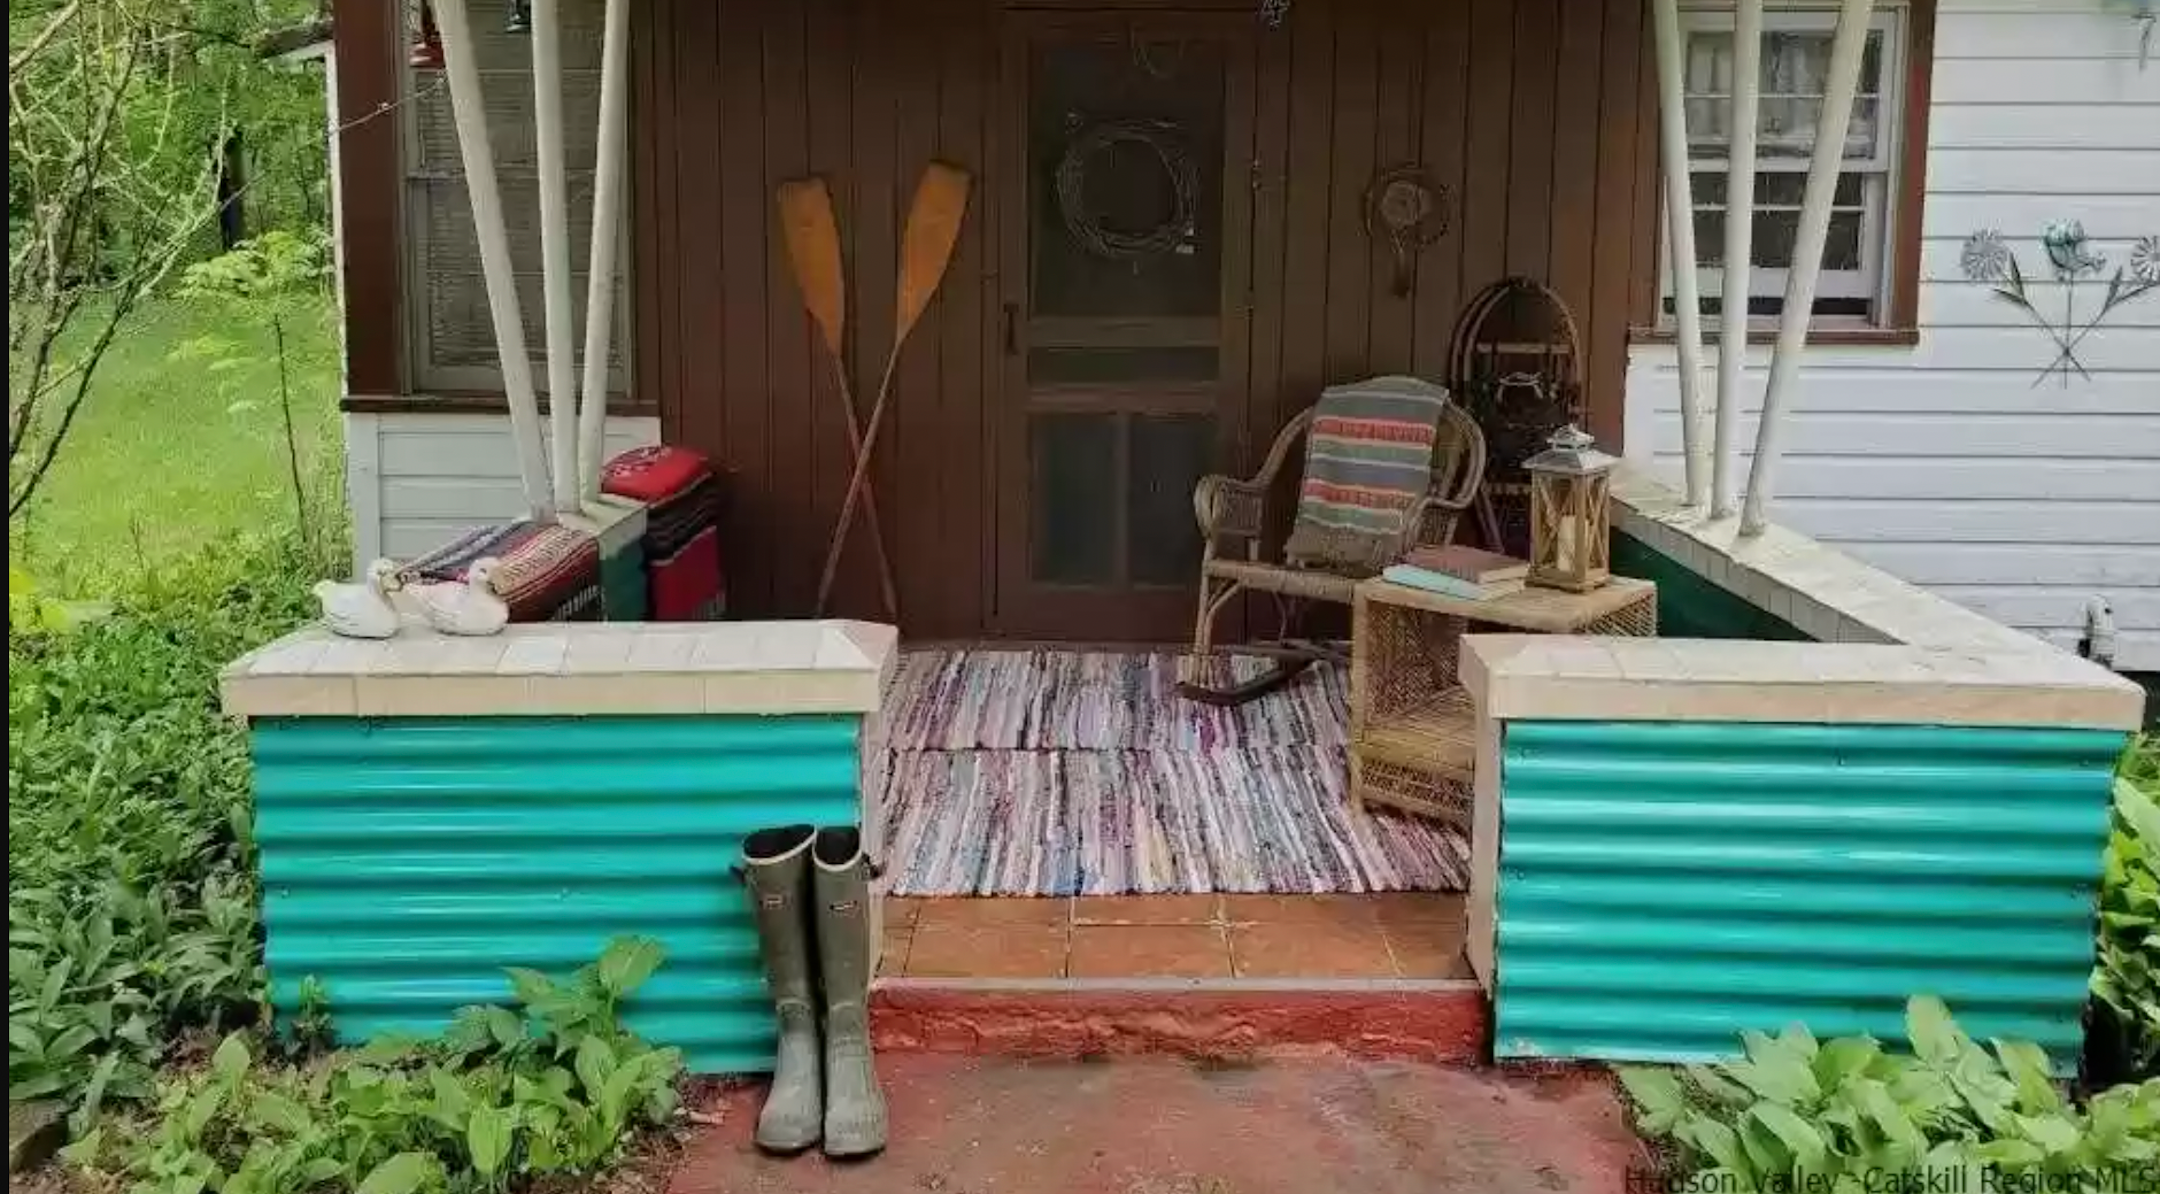 Front porch of a bungalow in the Catskills